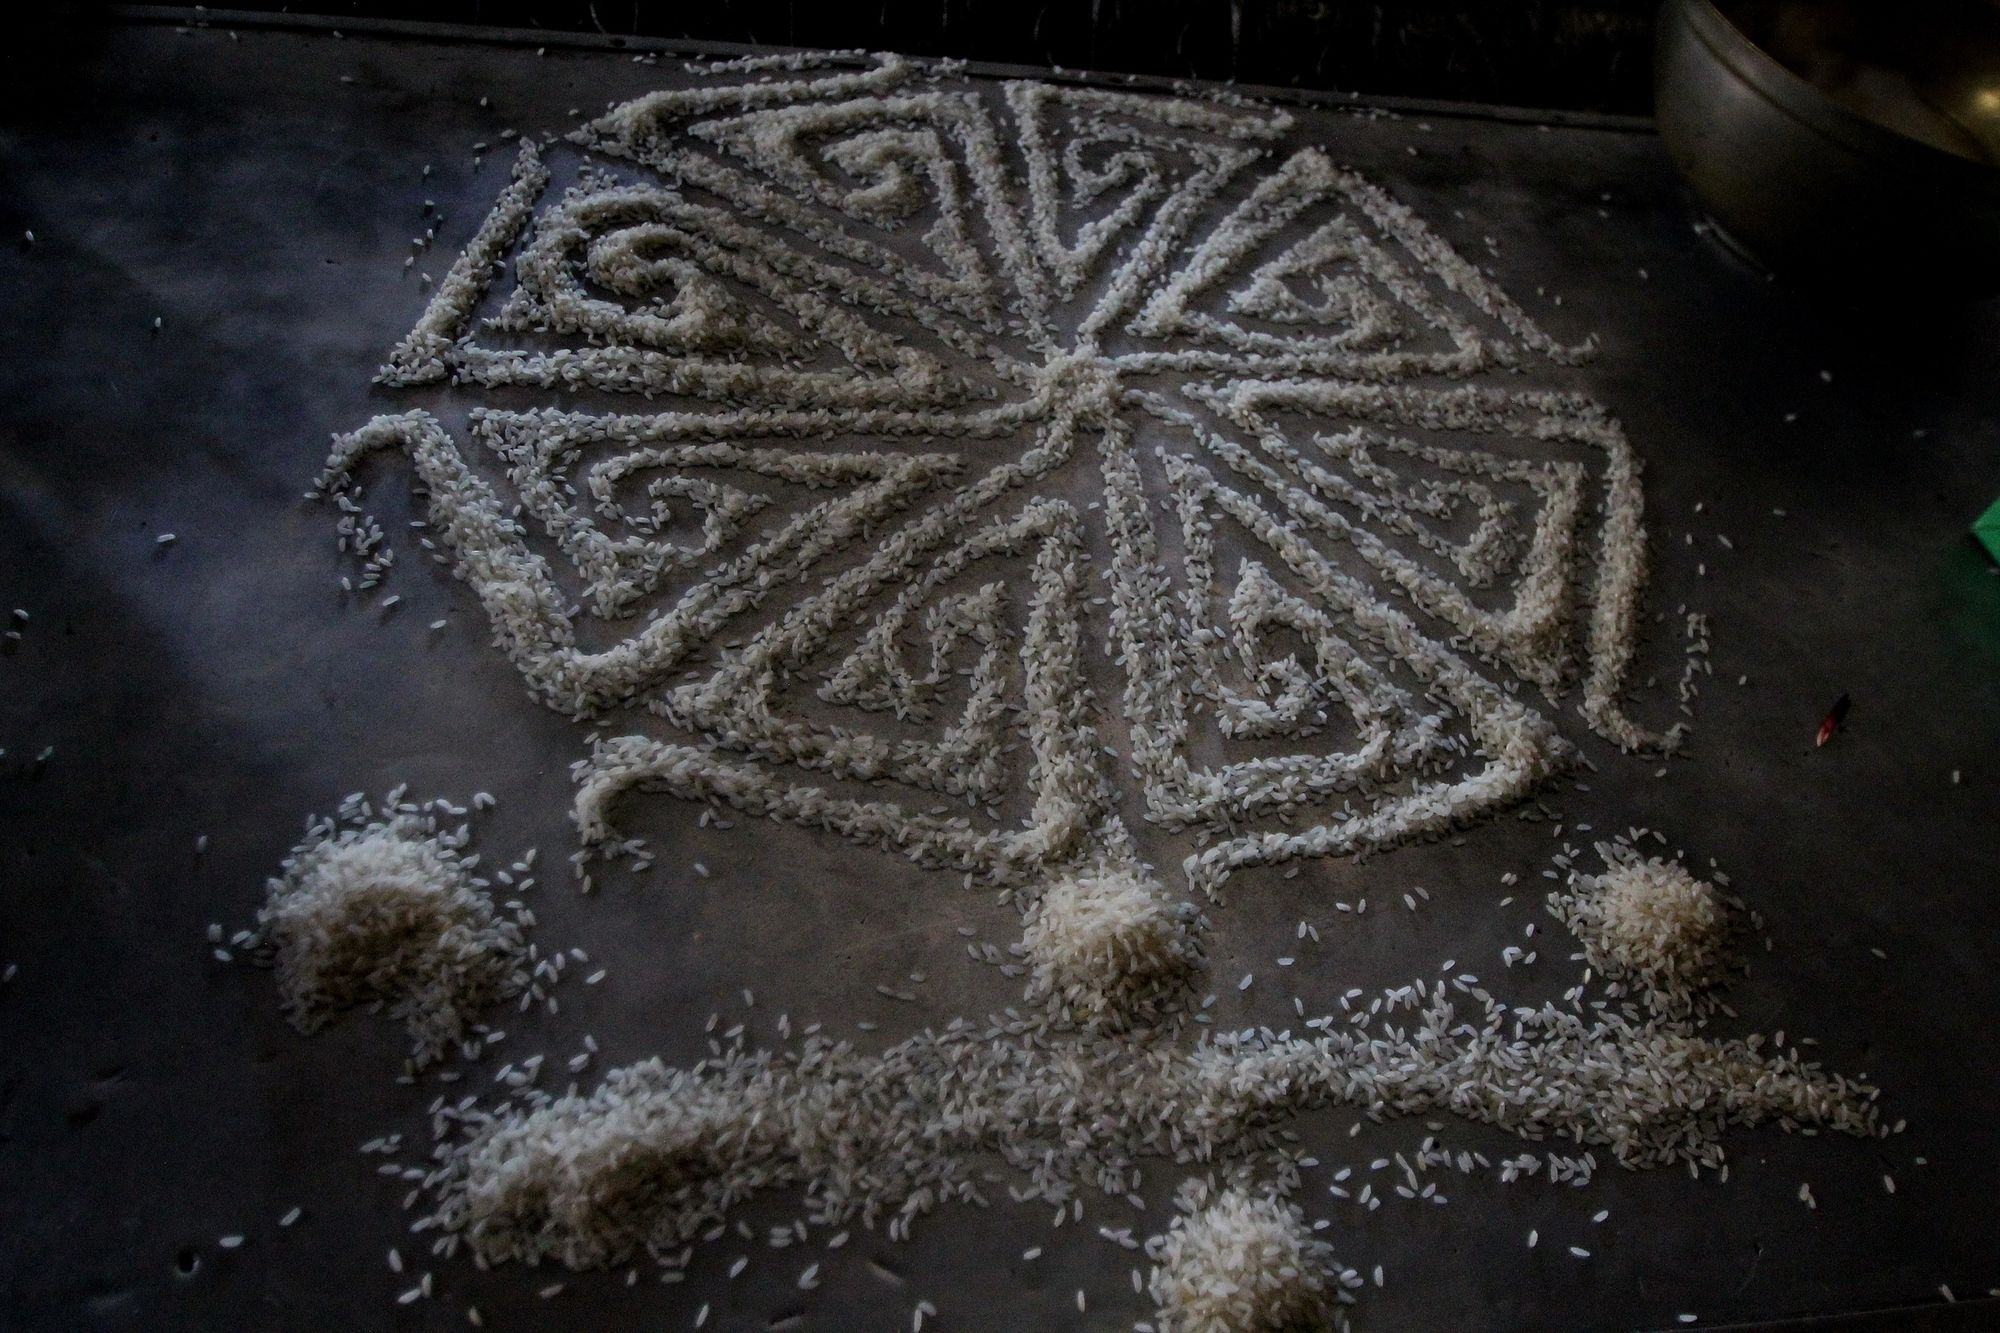 Jain rice designs to liberate the soul